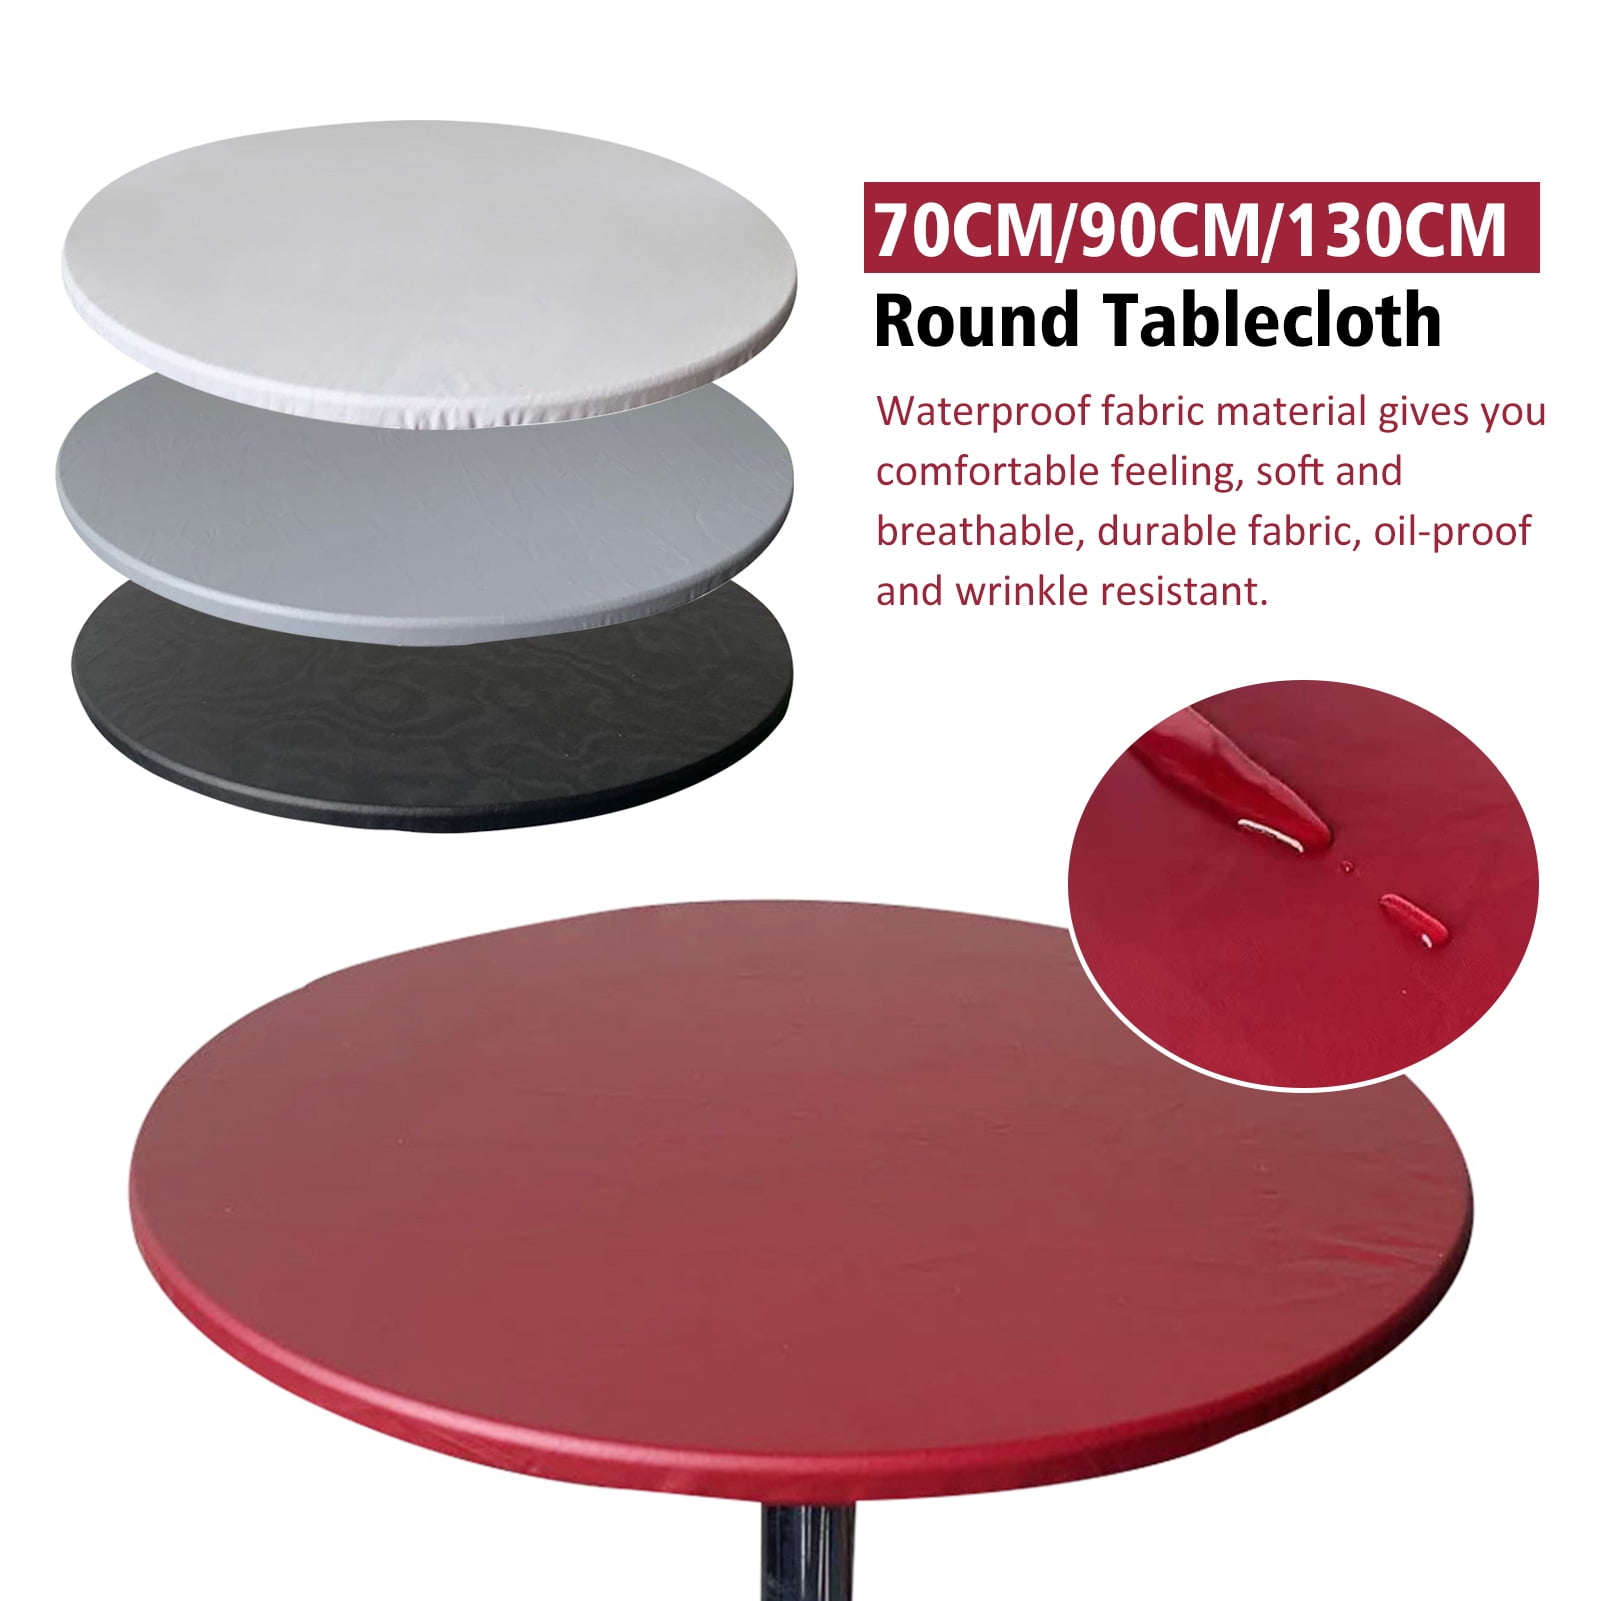 Calidaka Waterproof Solid Round, How To Make A Round Table Cover With Elastic